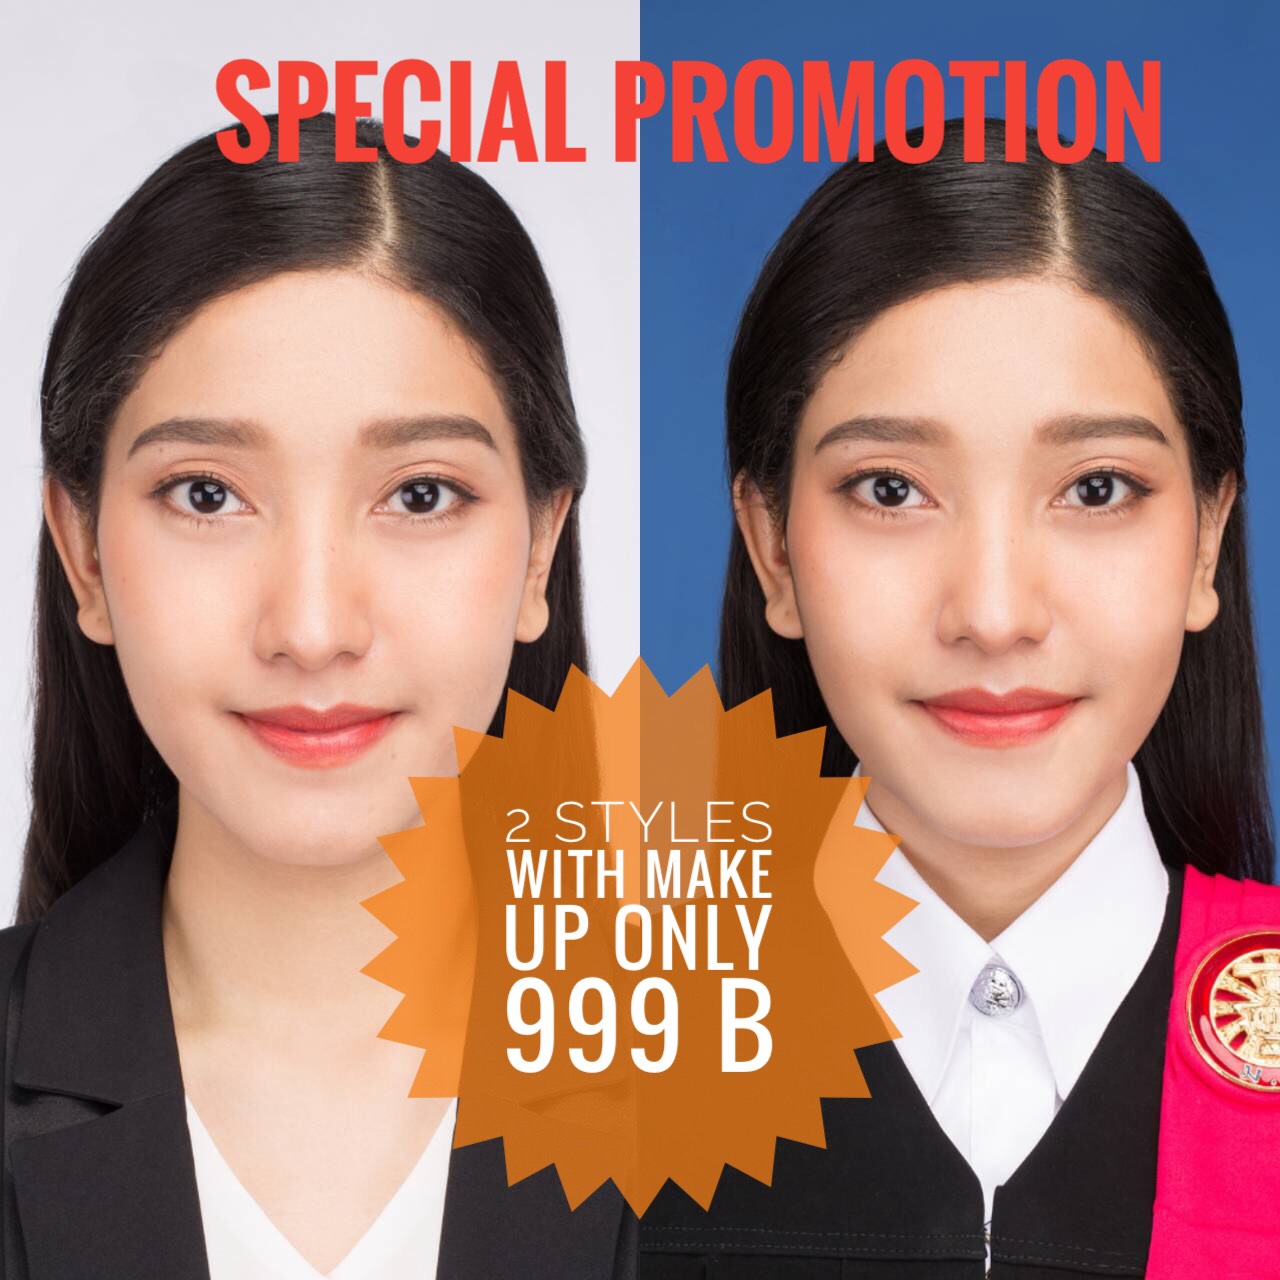 special promotion 2 styles with make up only 999B